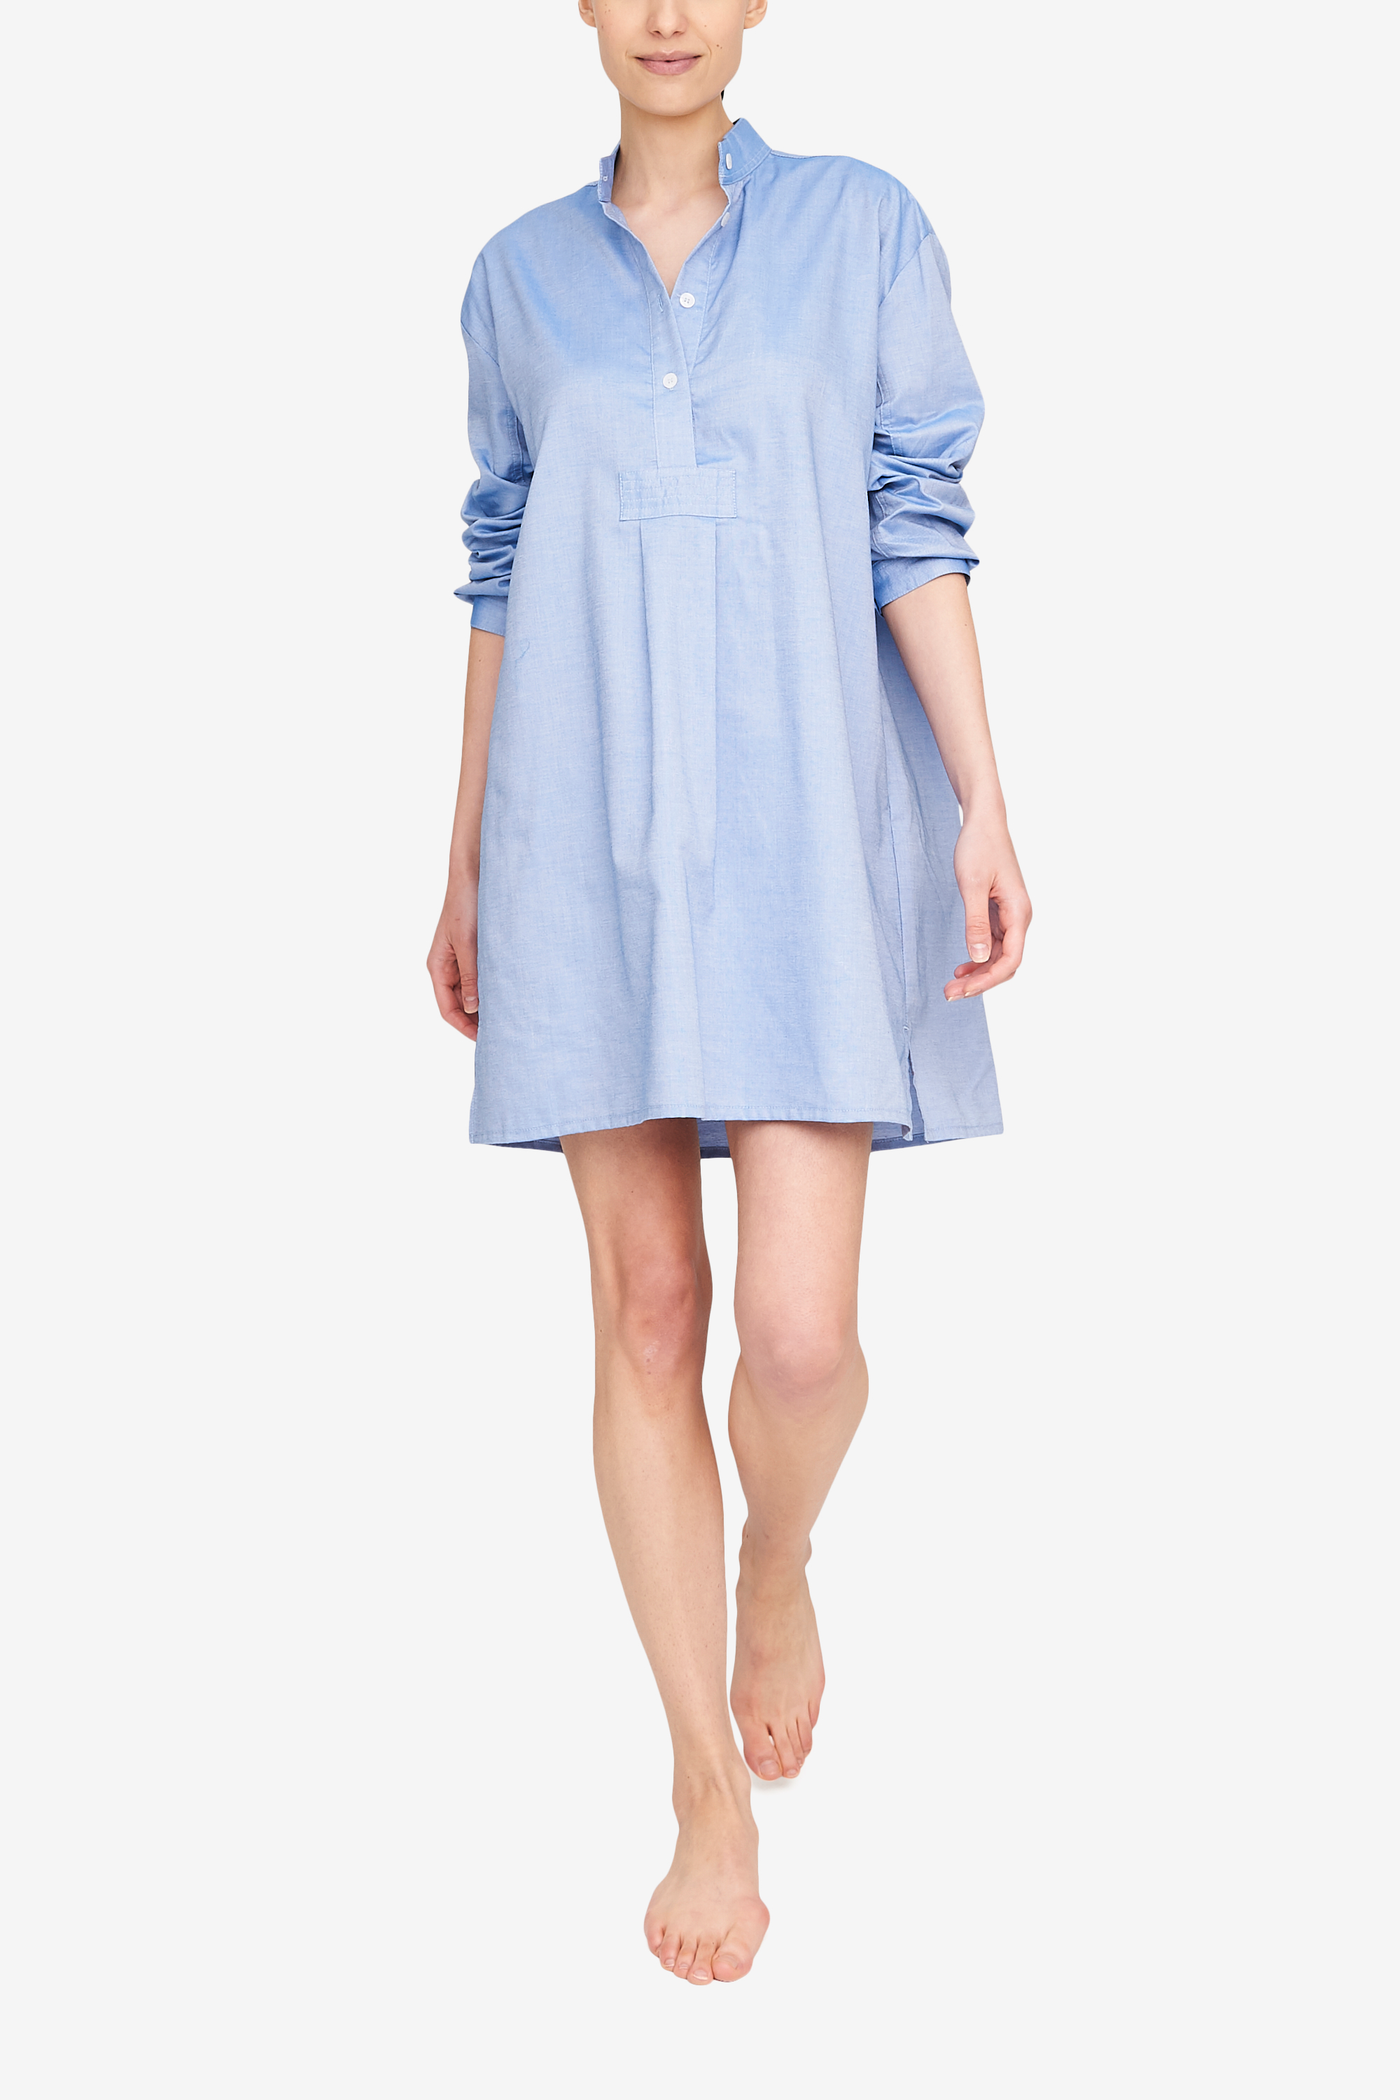 Front view of the Short Sleep shirt in a blue cotton oxford shirting. The sleeves are cuffed and full length, the shirt hits just above the knee for people of an average height.